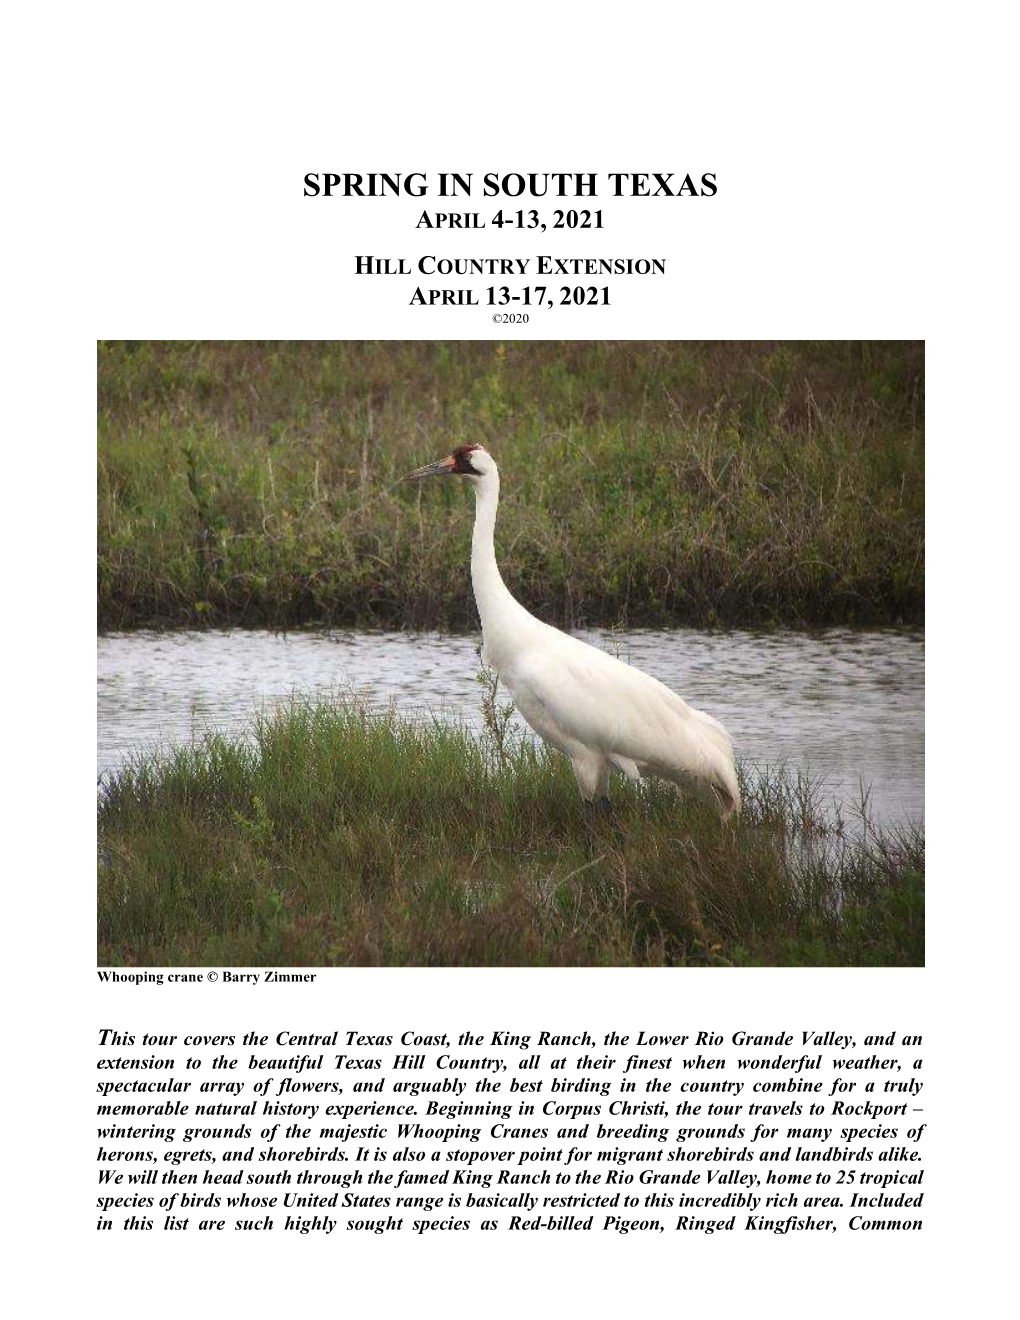 Spring in South Texas April 4-13, 2021